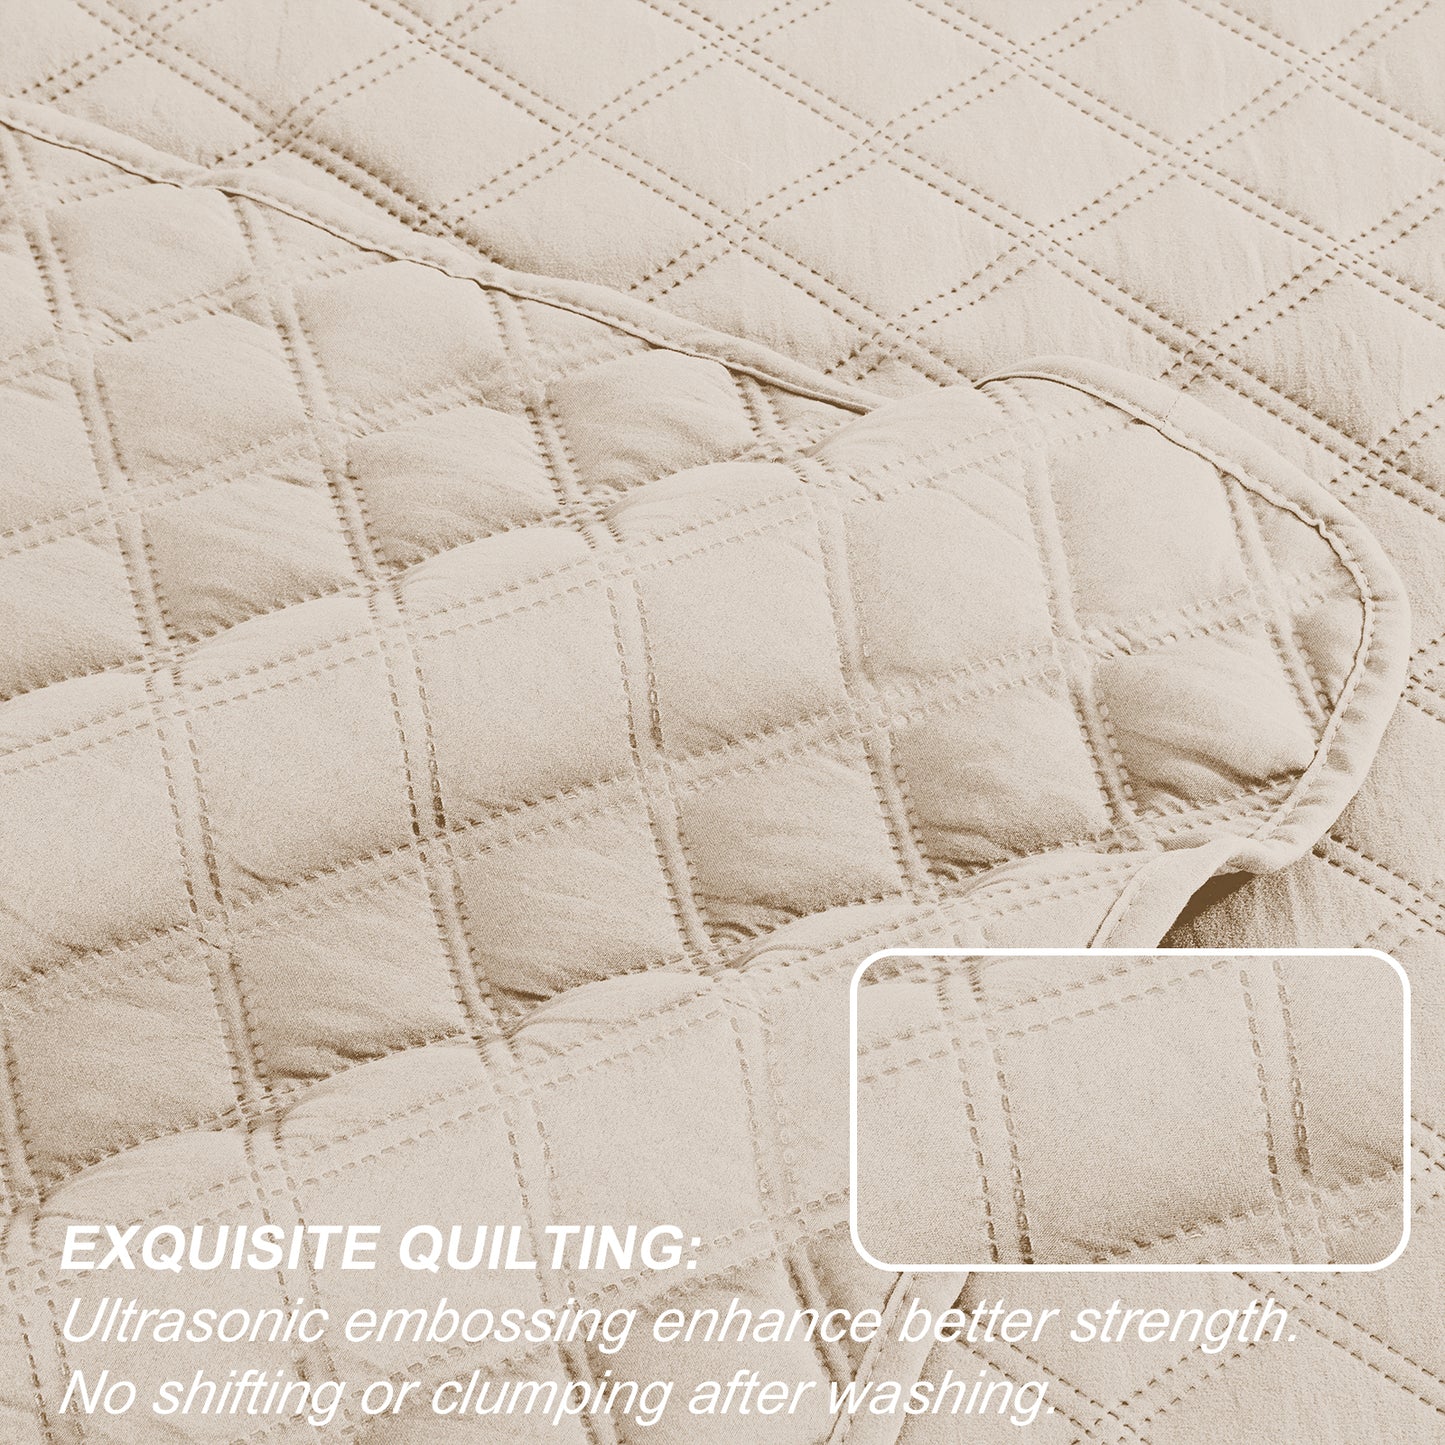 Exclusivo Mezcla 2-Piece Bone Twin Size Quilt Set, Box Pattern Ultrasonic Lightweight and Soft Quilts/Bedspreads/Coverlets/Bedding Set (1 Quilt, 1 Pillow Sham) for All Seasons